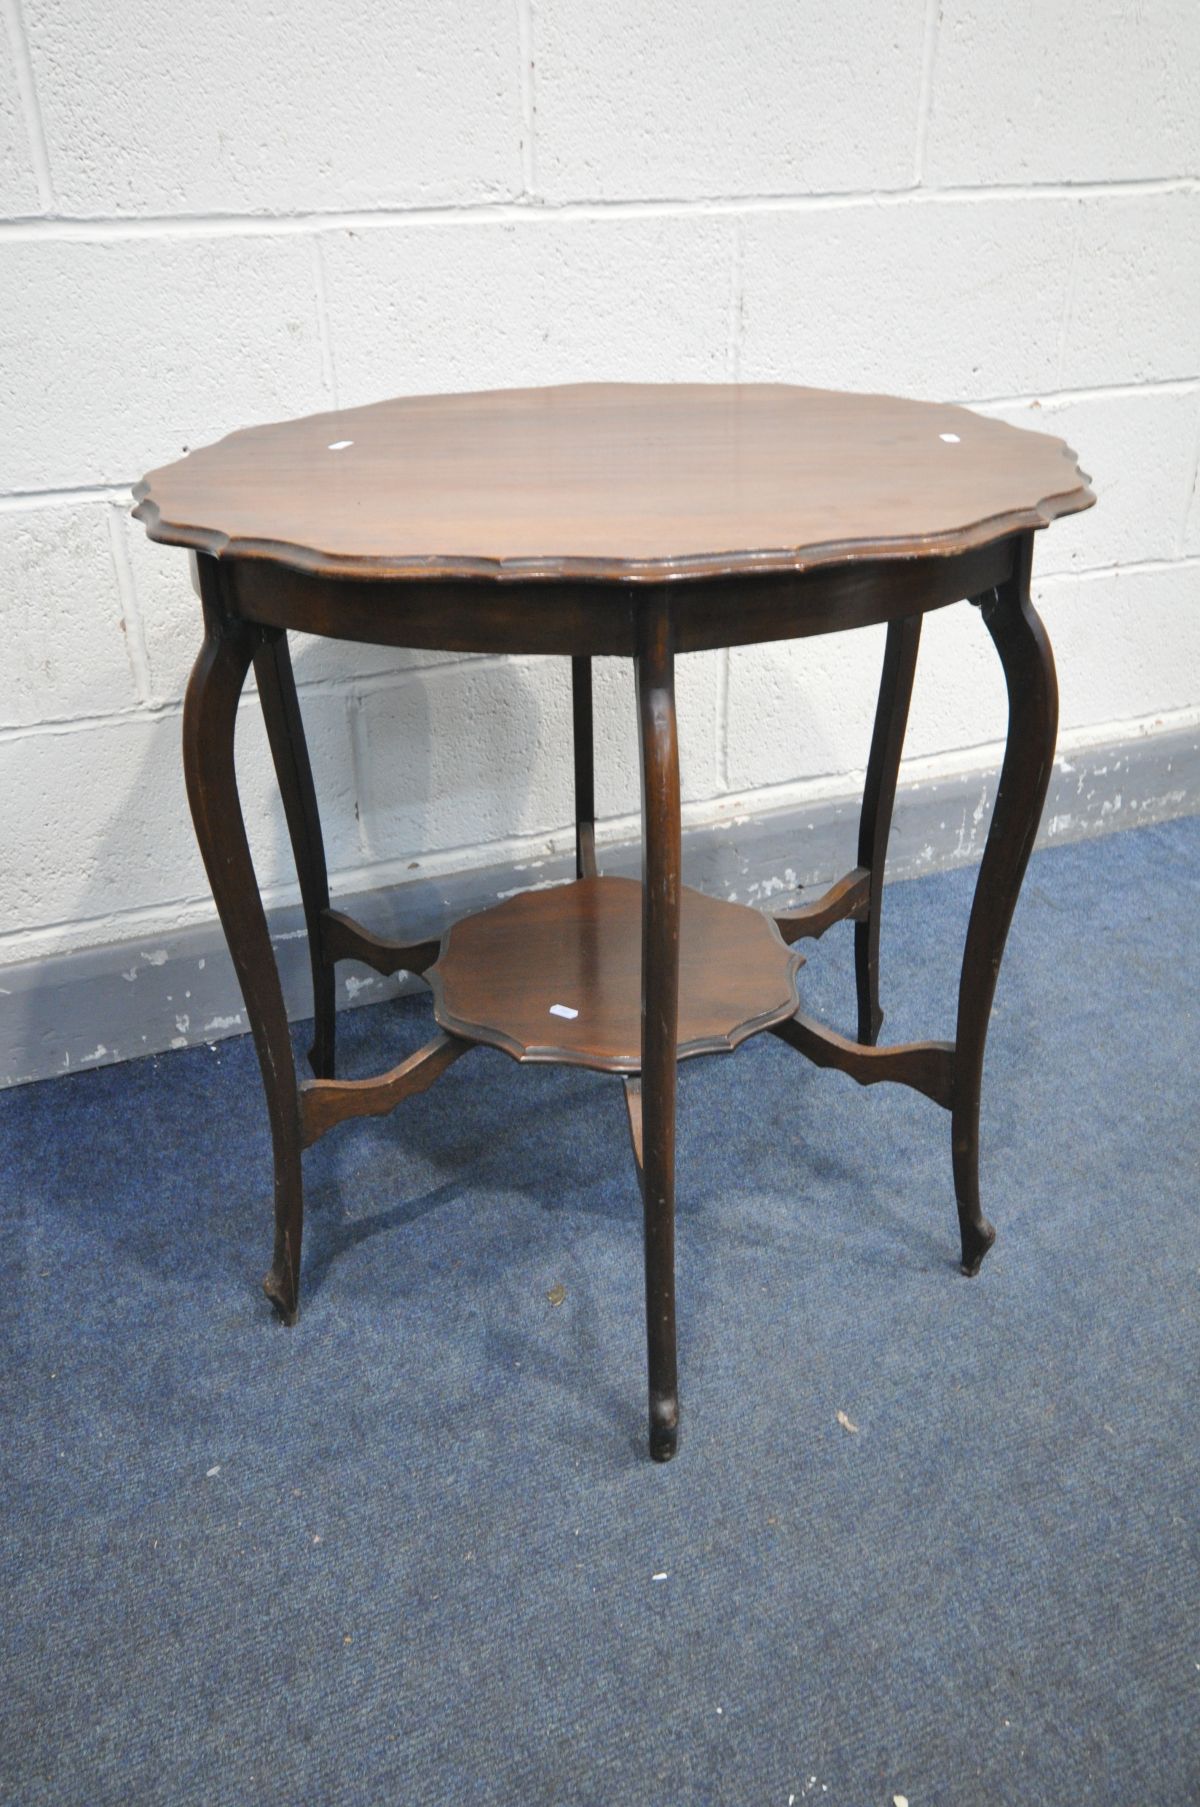 AN EARLY 20TH CENTURY MAHOGANY CENTRE TABLE, with wavy edges, united by a similar undershelf, - Image 2 of 3